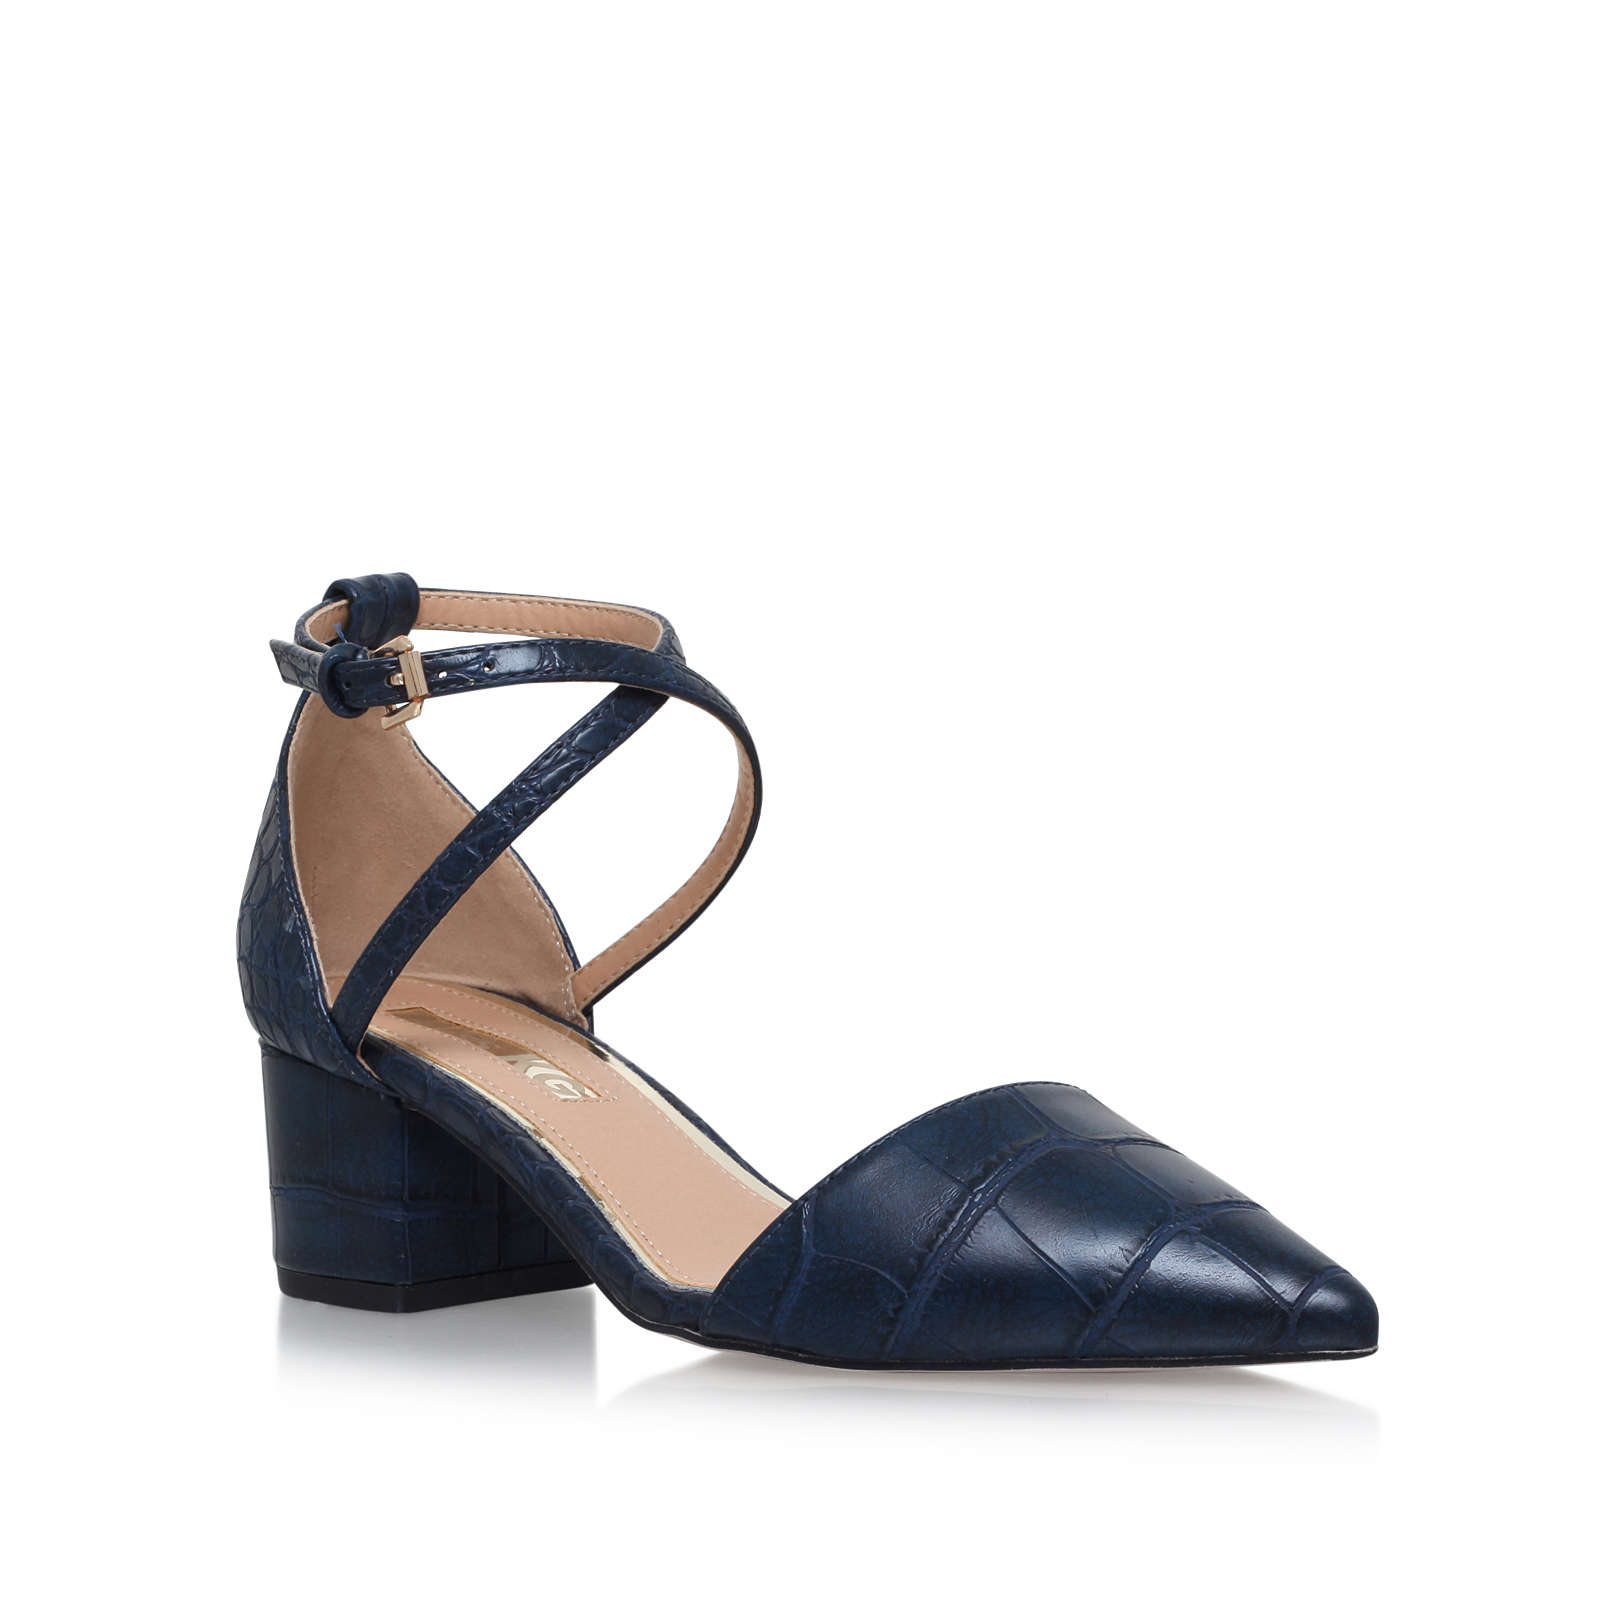 AVA Miss KG Ava Navy Low Heel Court Shoes by MISS KG